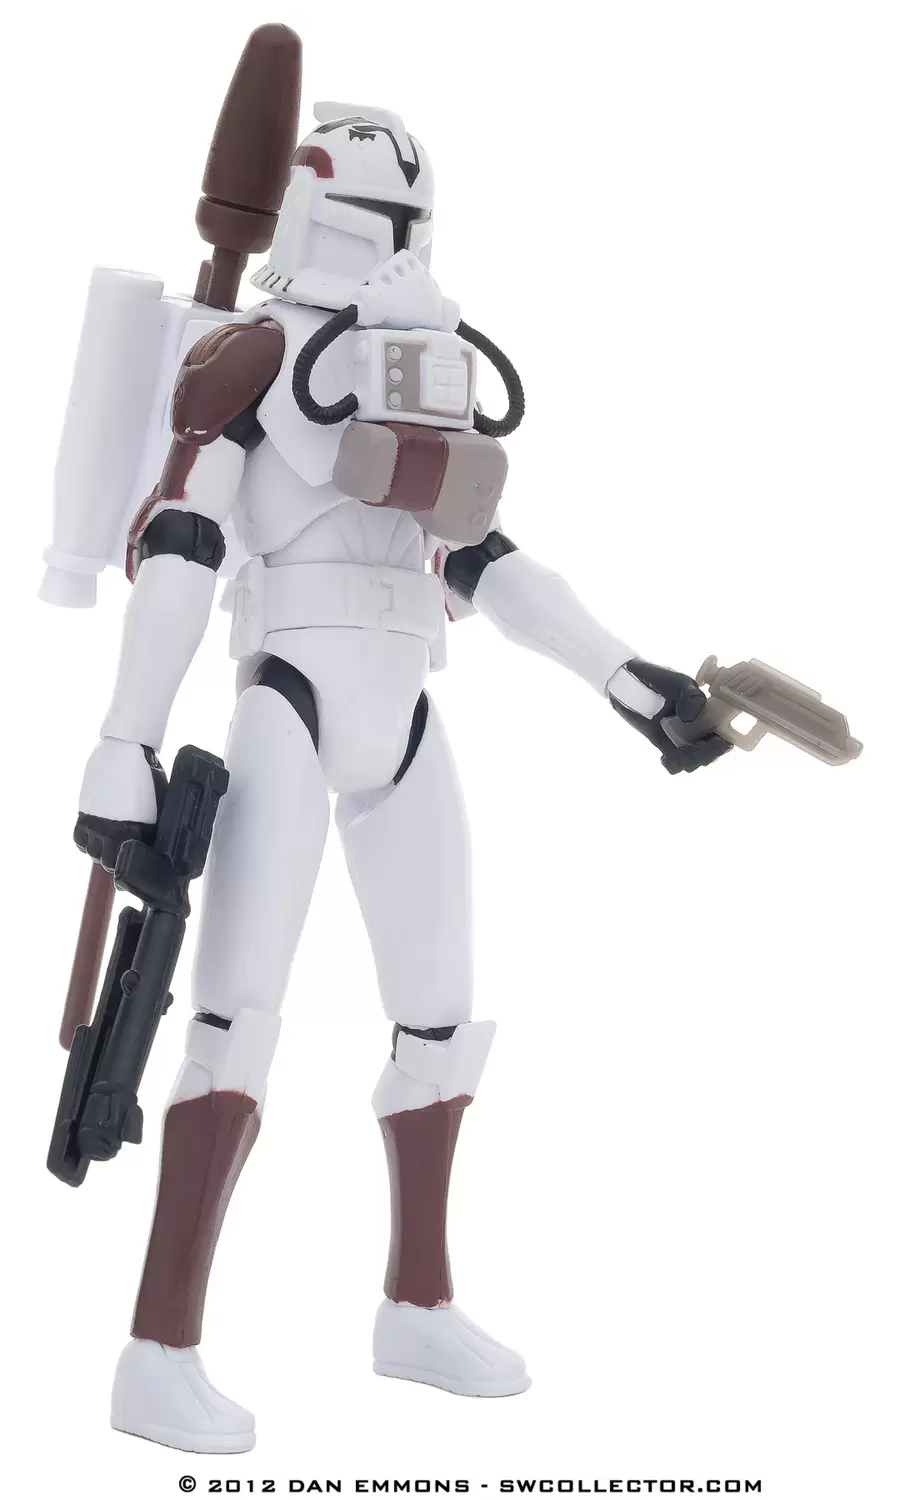 The Clone Wars (TCW 2009) - Clone Trooper with Space Gear